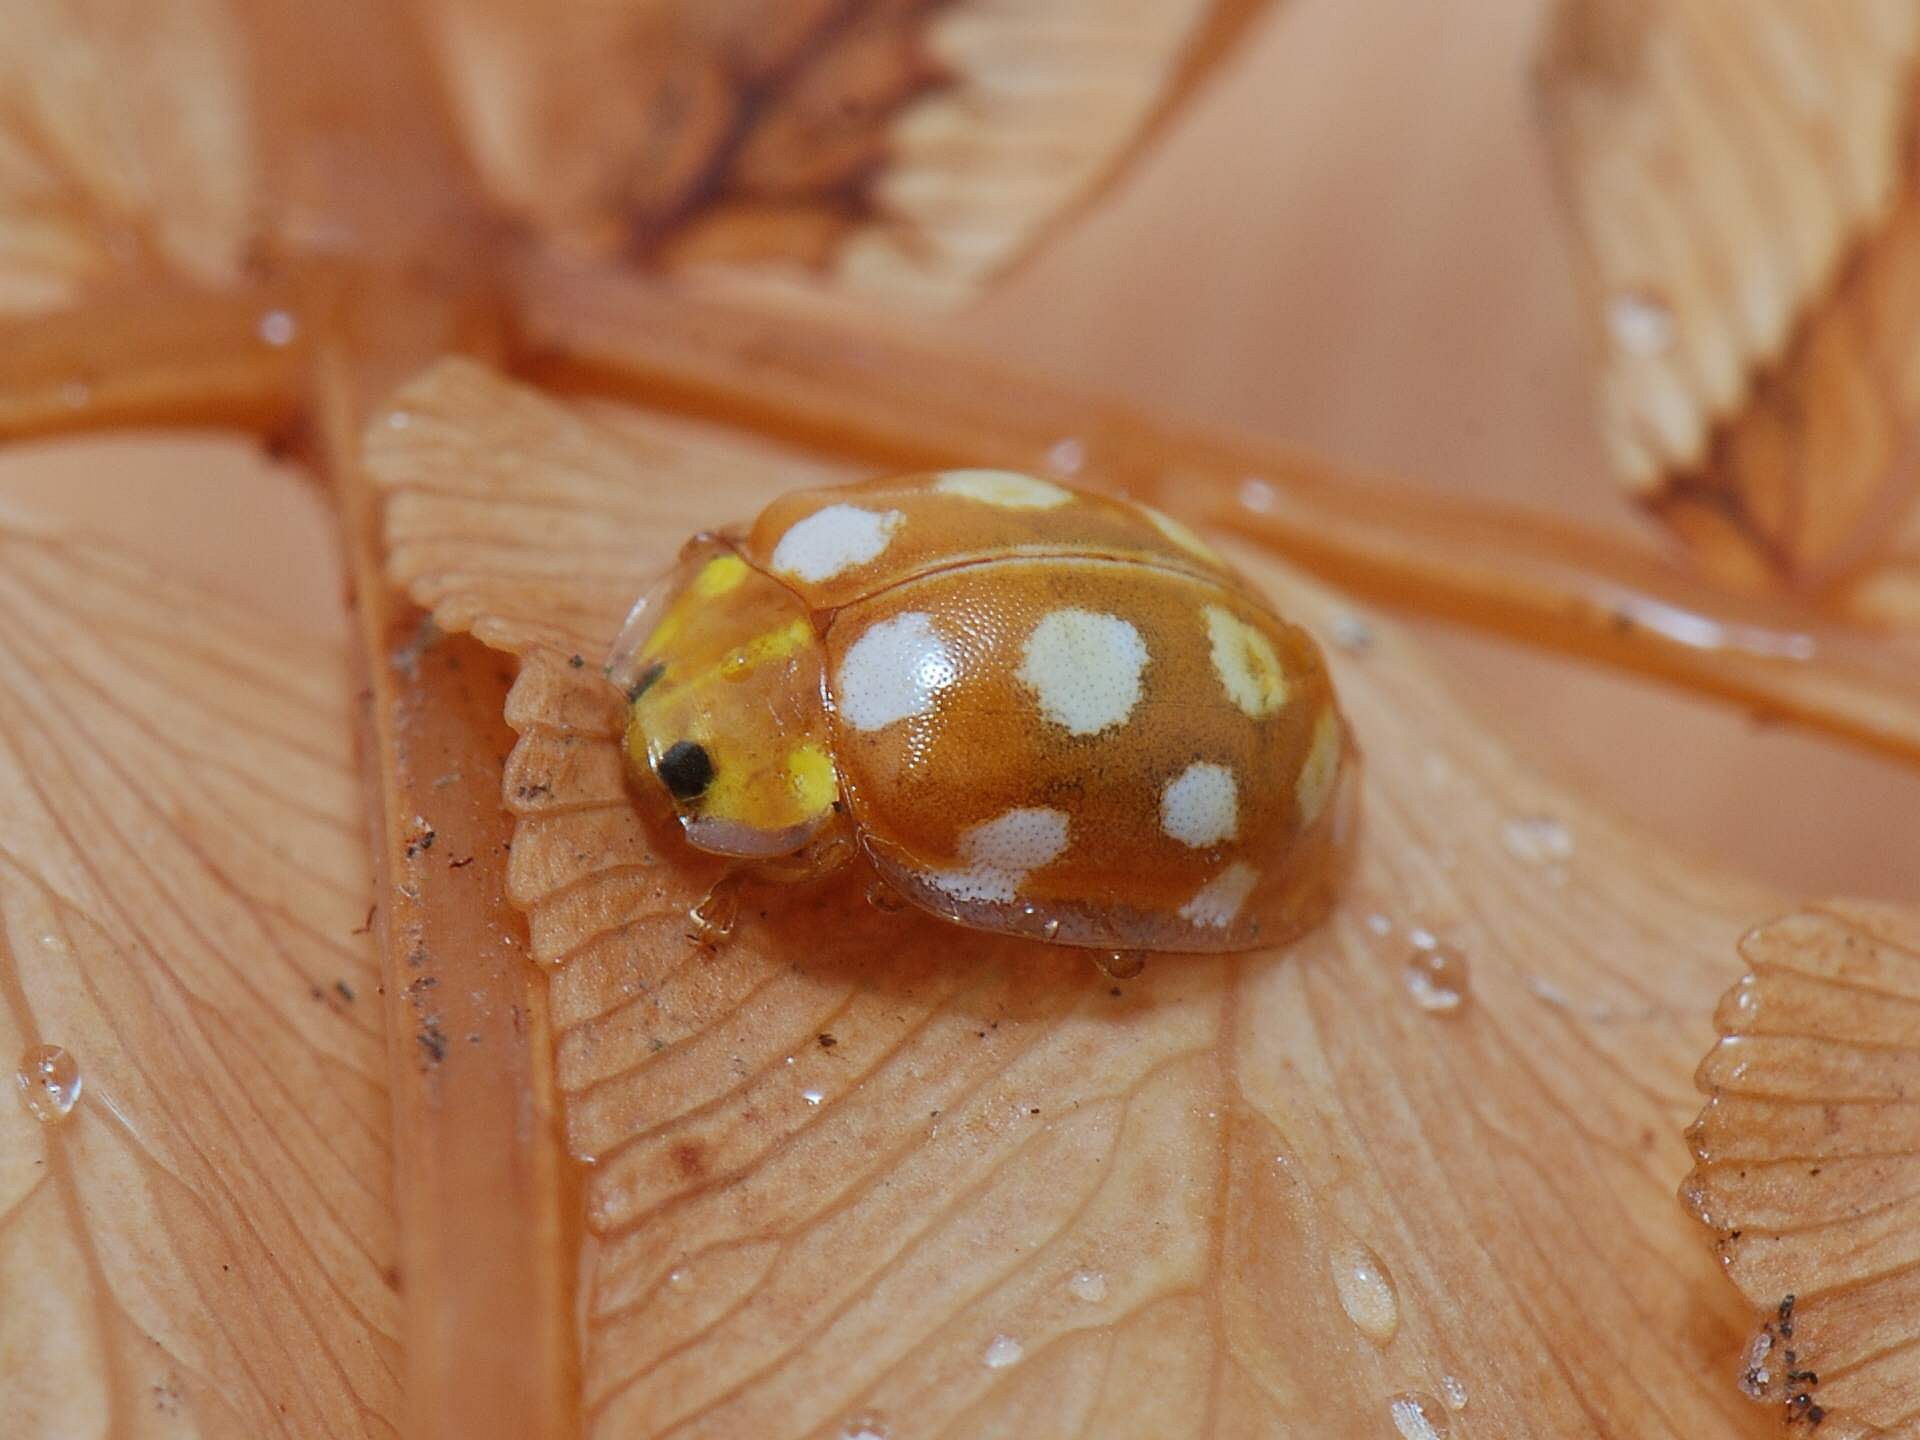 Orange Ladybird The Orange Ladybird, Halyzia sedecimguttata, used to be considered as an indicator of ancient woodland but has become widespread during the last 20 years as it is now commonly associated with sycamore trees.